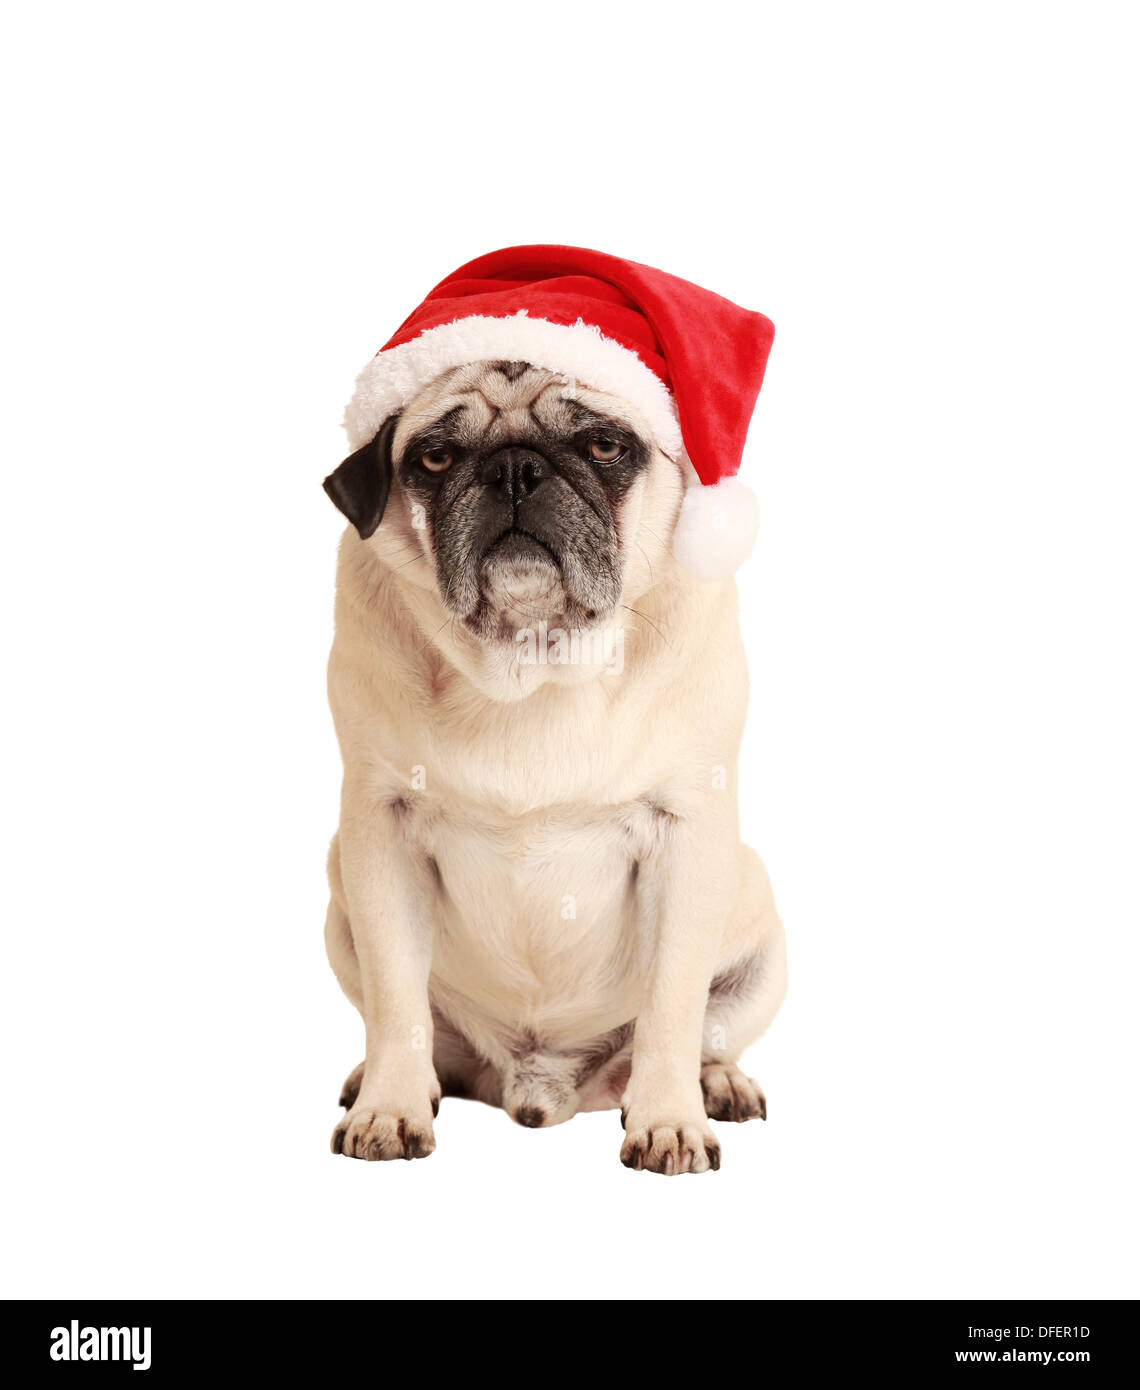 dog as a Christmas gift, exempted, white background, dressed as Santa Claus, cutout Stock Photo